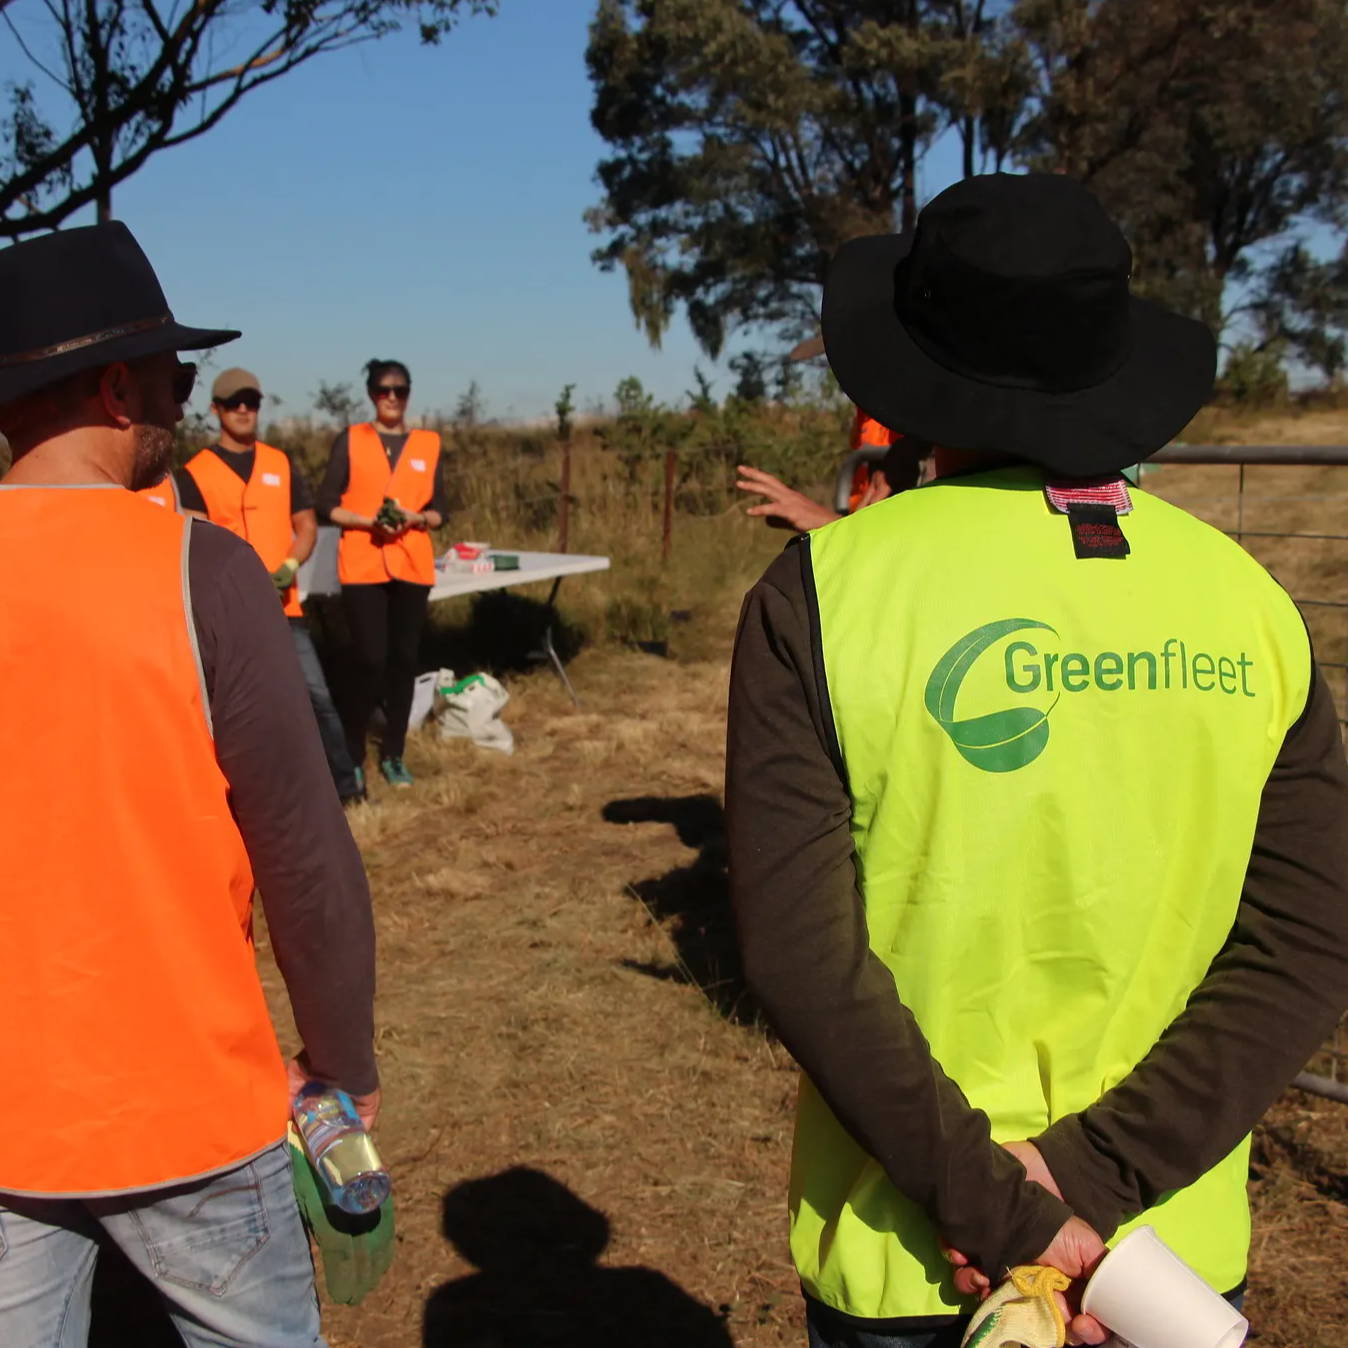 Greenfleet planting trees to offset carbon footprints.